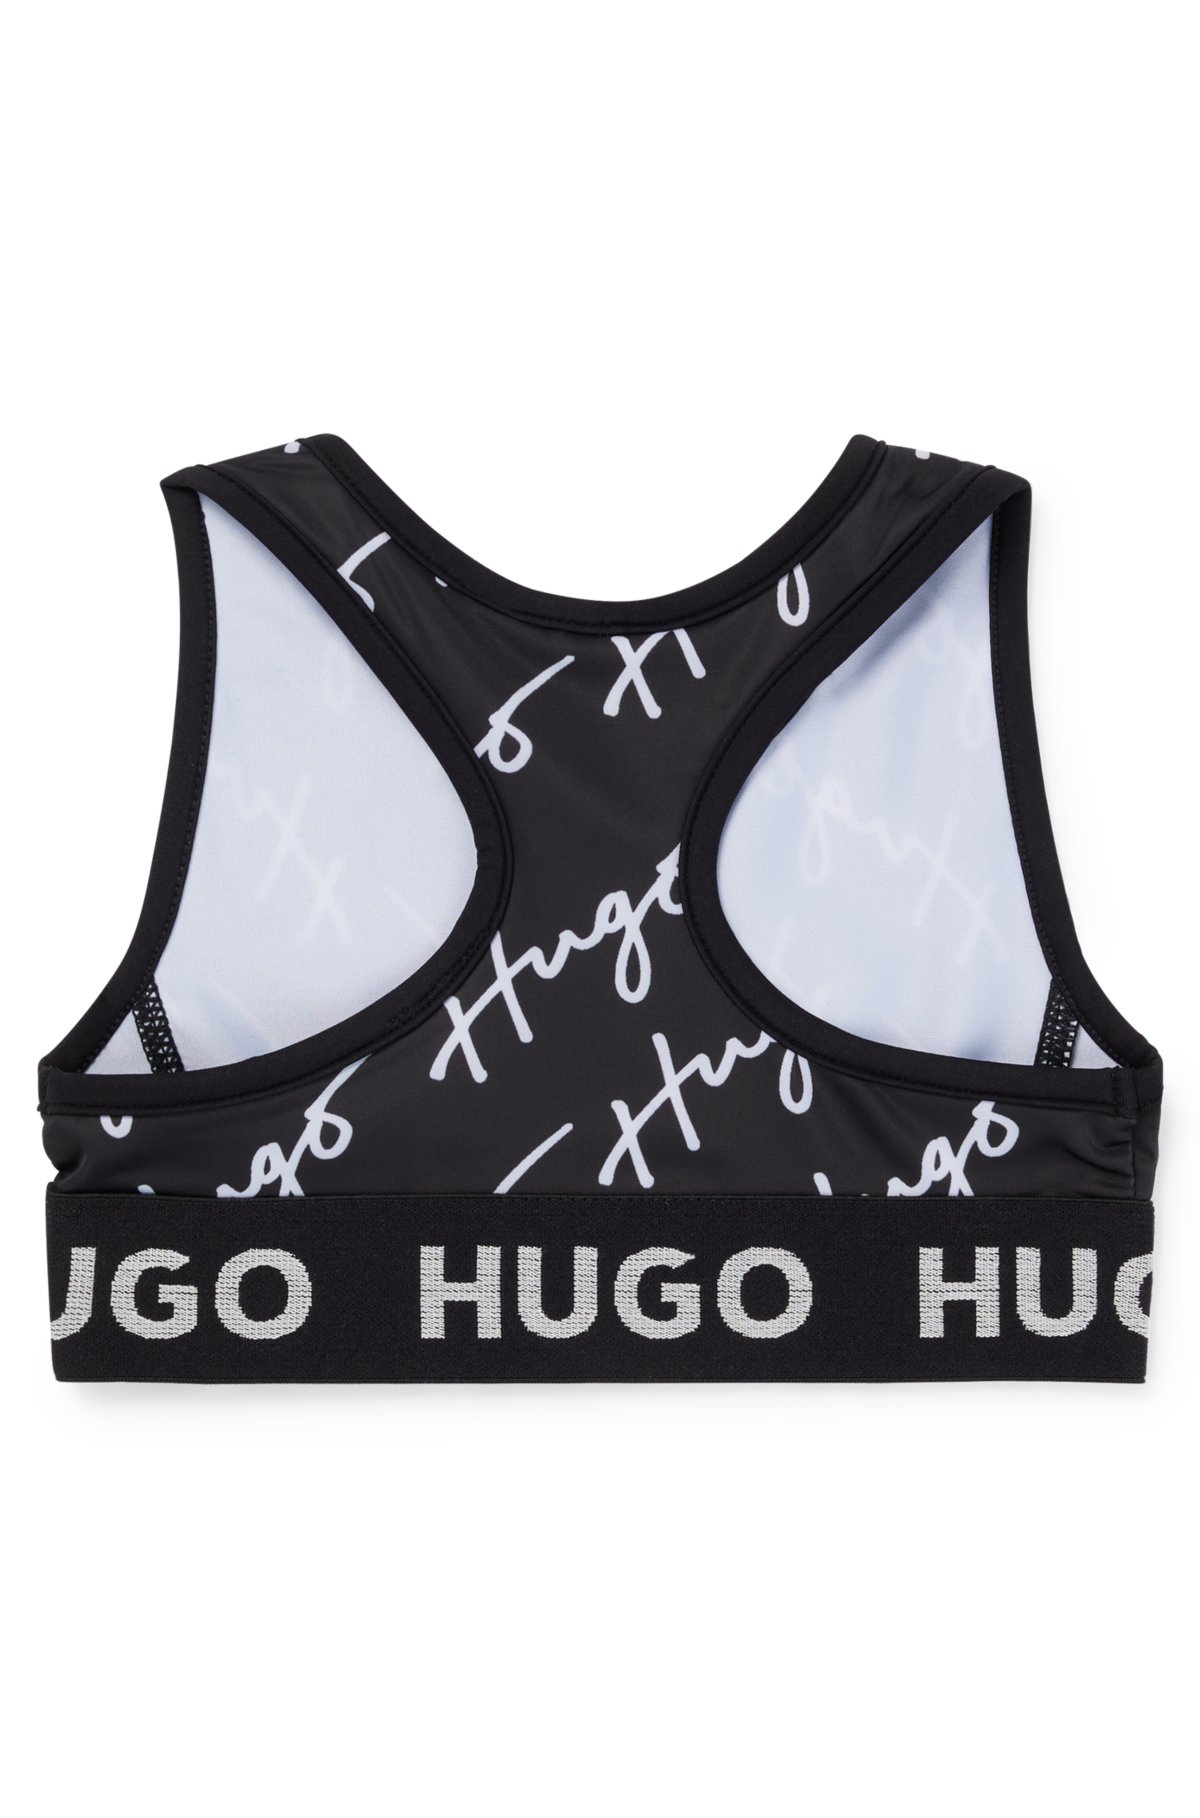 Kids' sports bra with signature stripes and logo